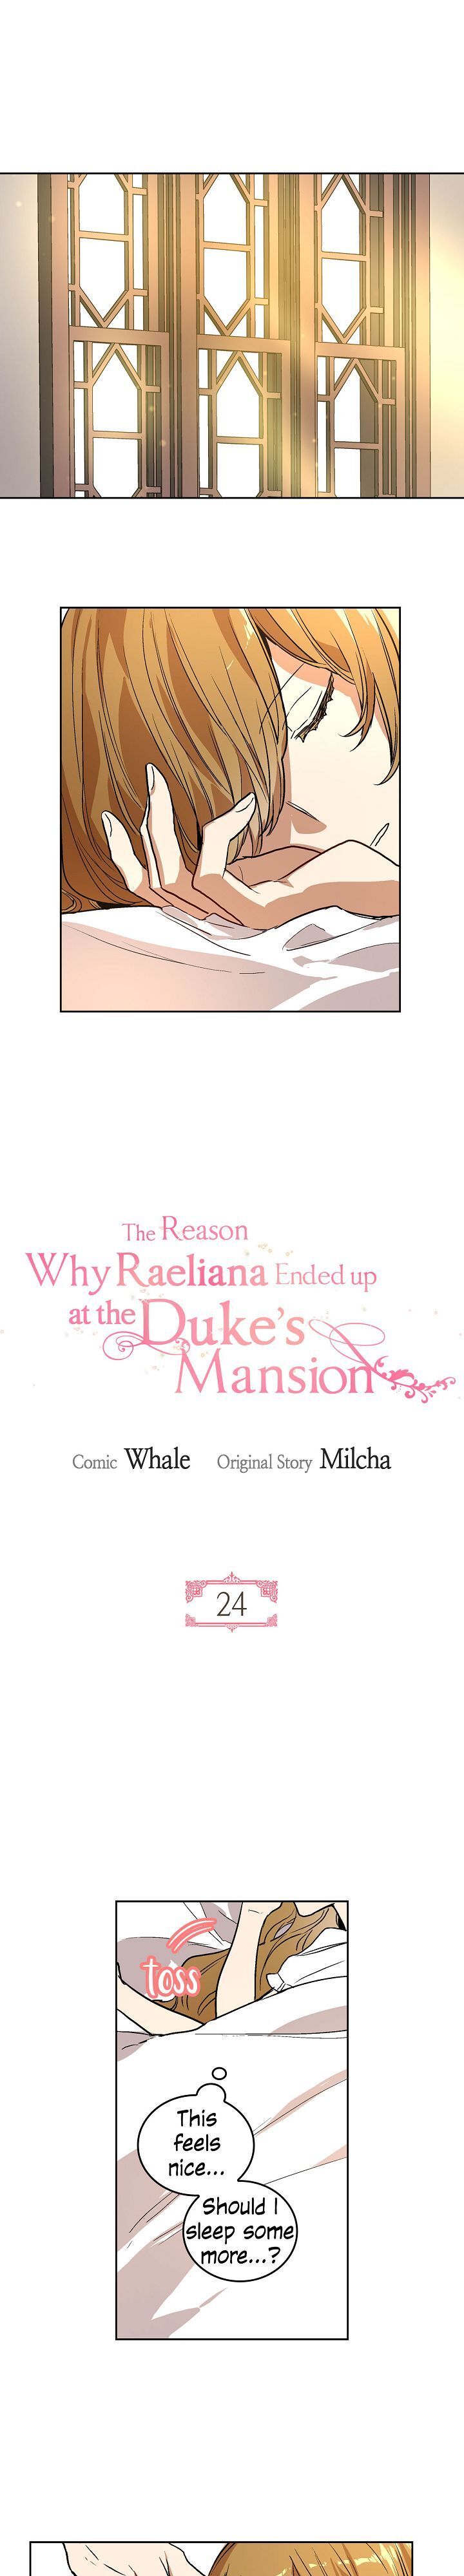 The Reason Why Raeliana Ended Up at the Duke's Mansion Chapter 024 page 2